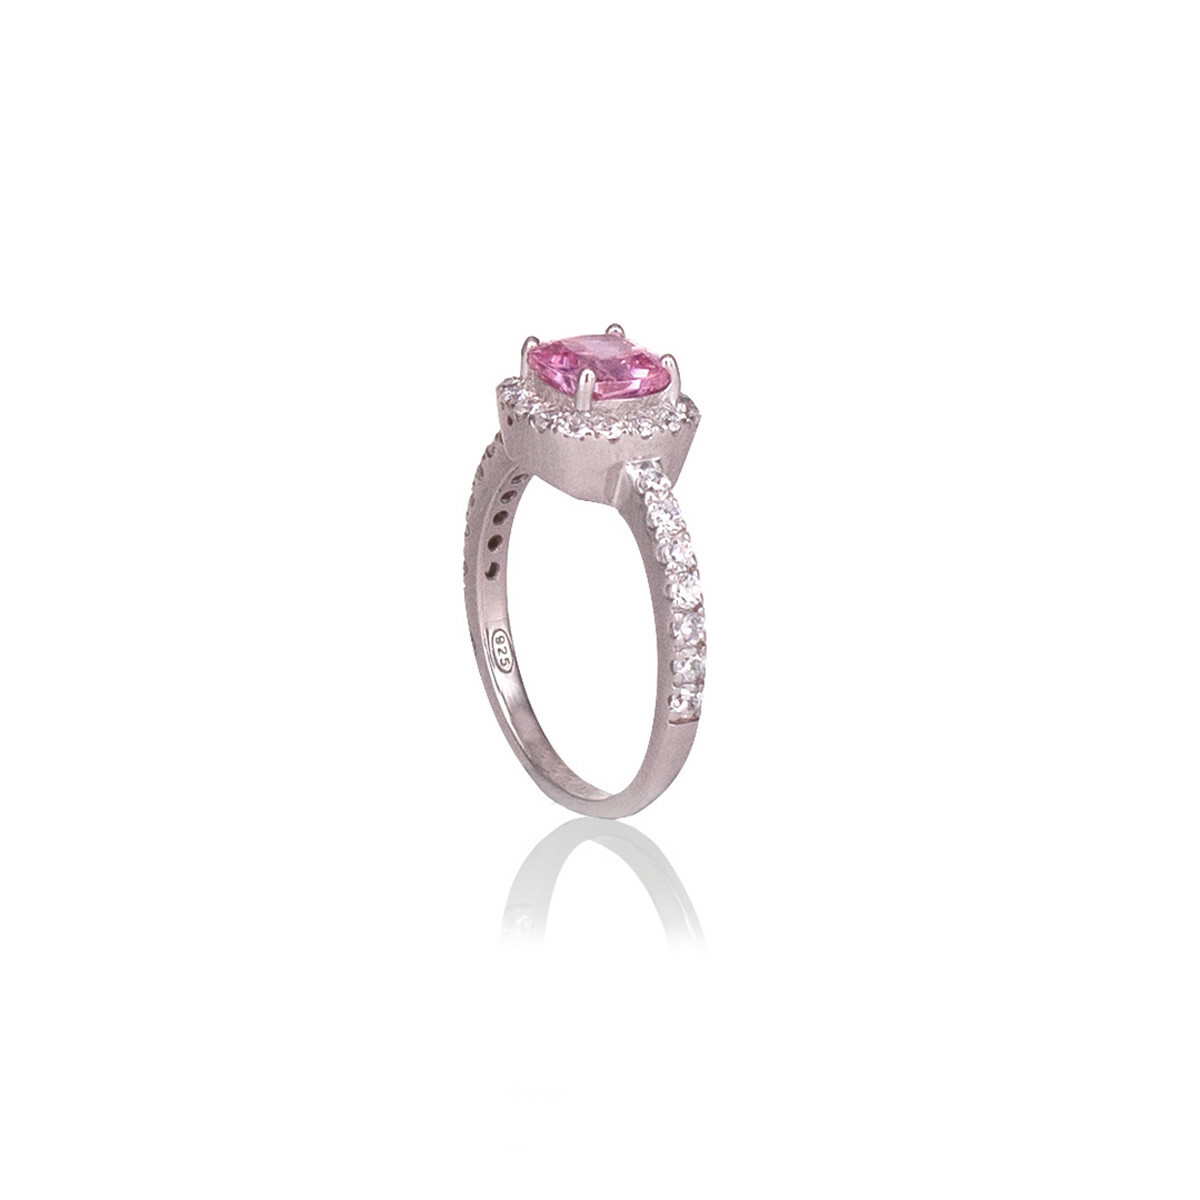 SILVER RING WITH PINK ZIRCONIA